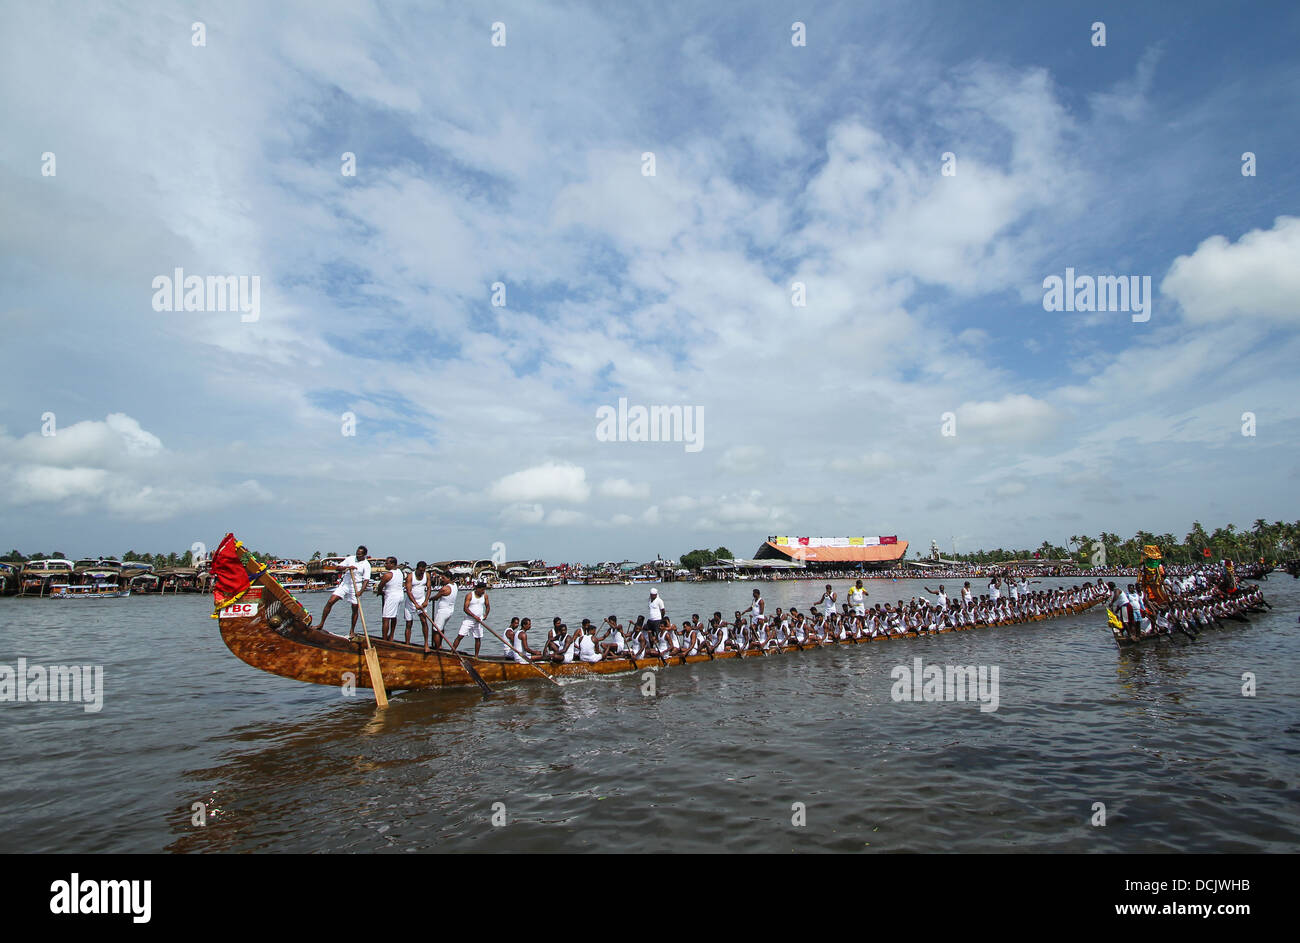 Nehru trophy boat race - annual boat race that occurs in Alappey. Stock Photo